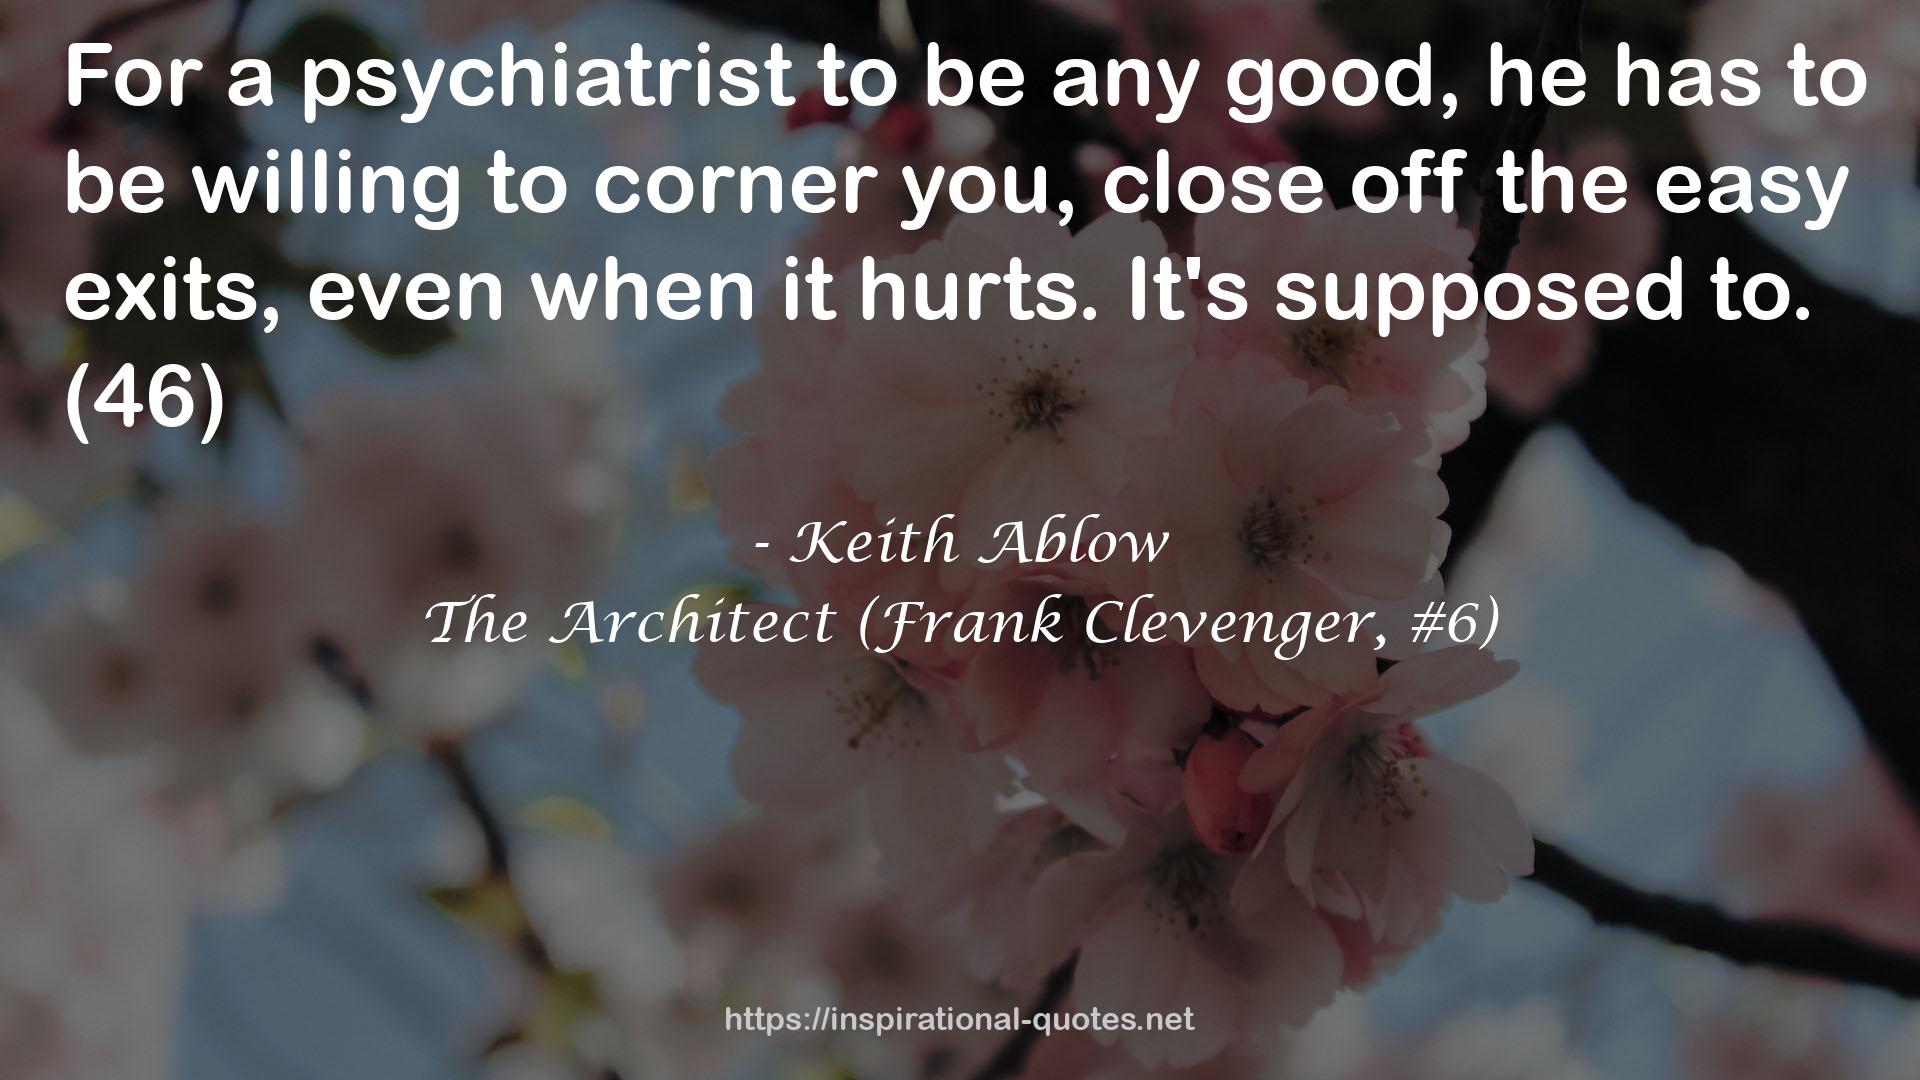 The Architect (Frank Clevenger, #6) QUOTES